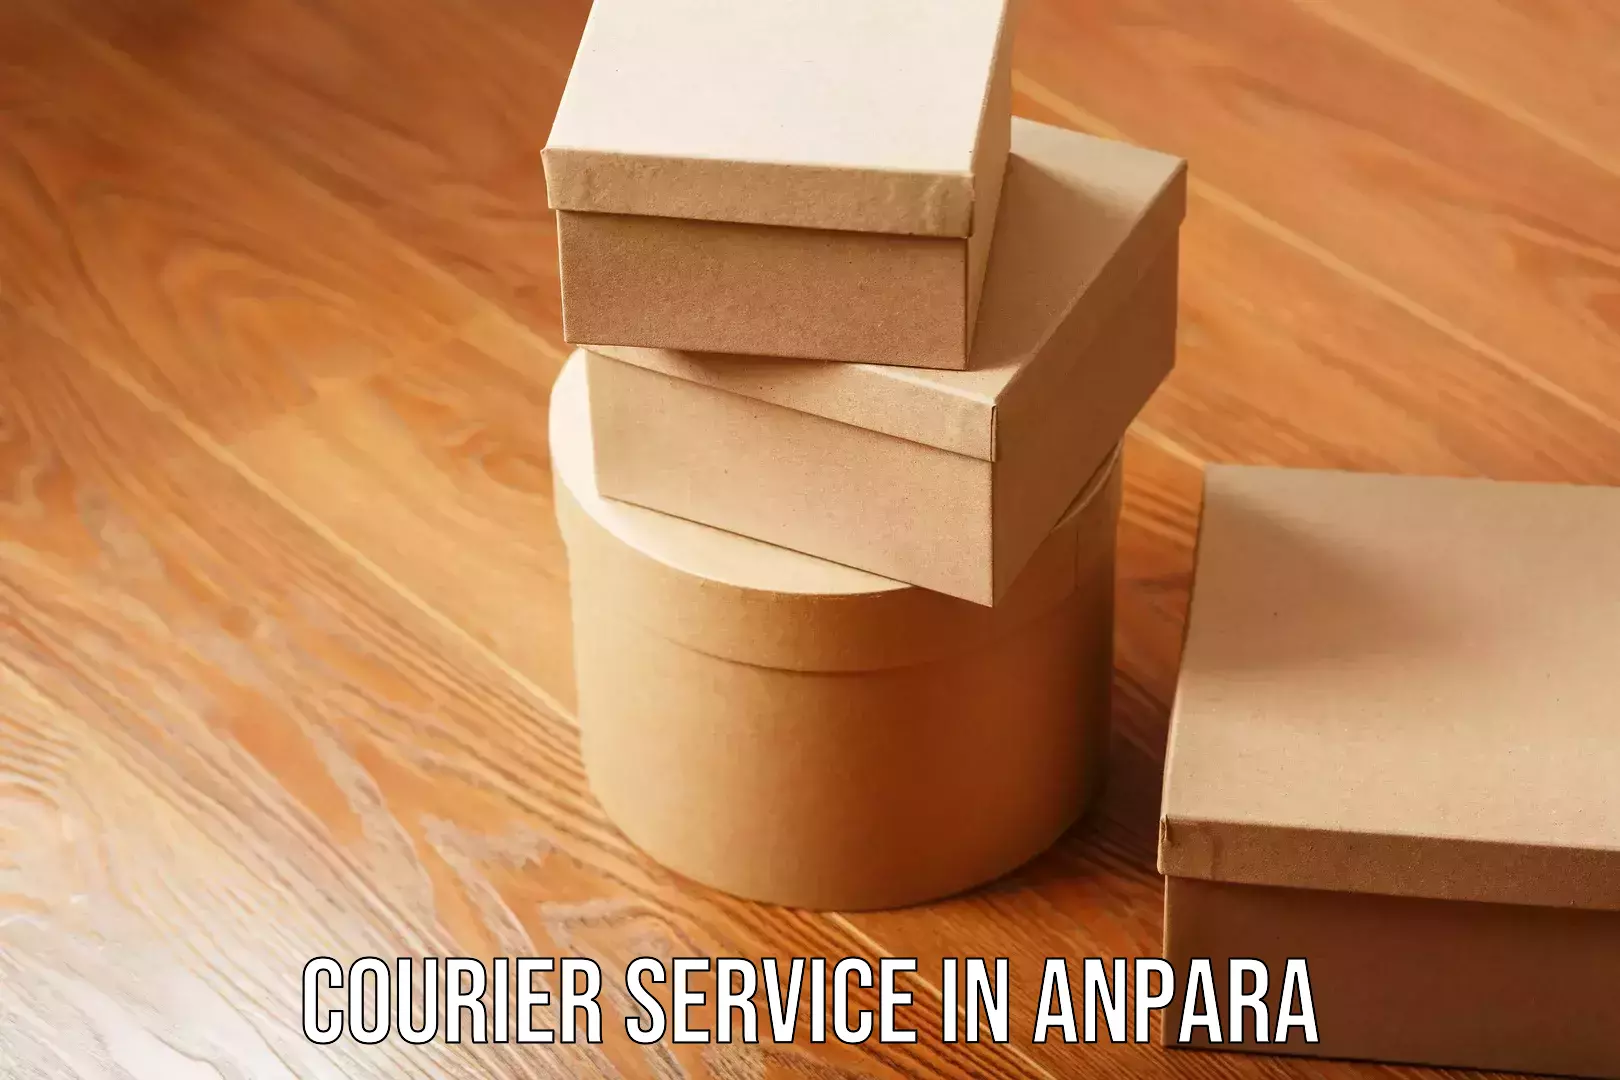 Fast delivery service in Anpara